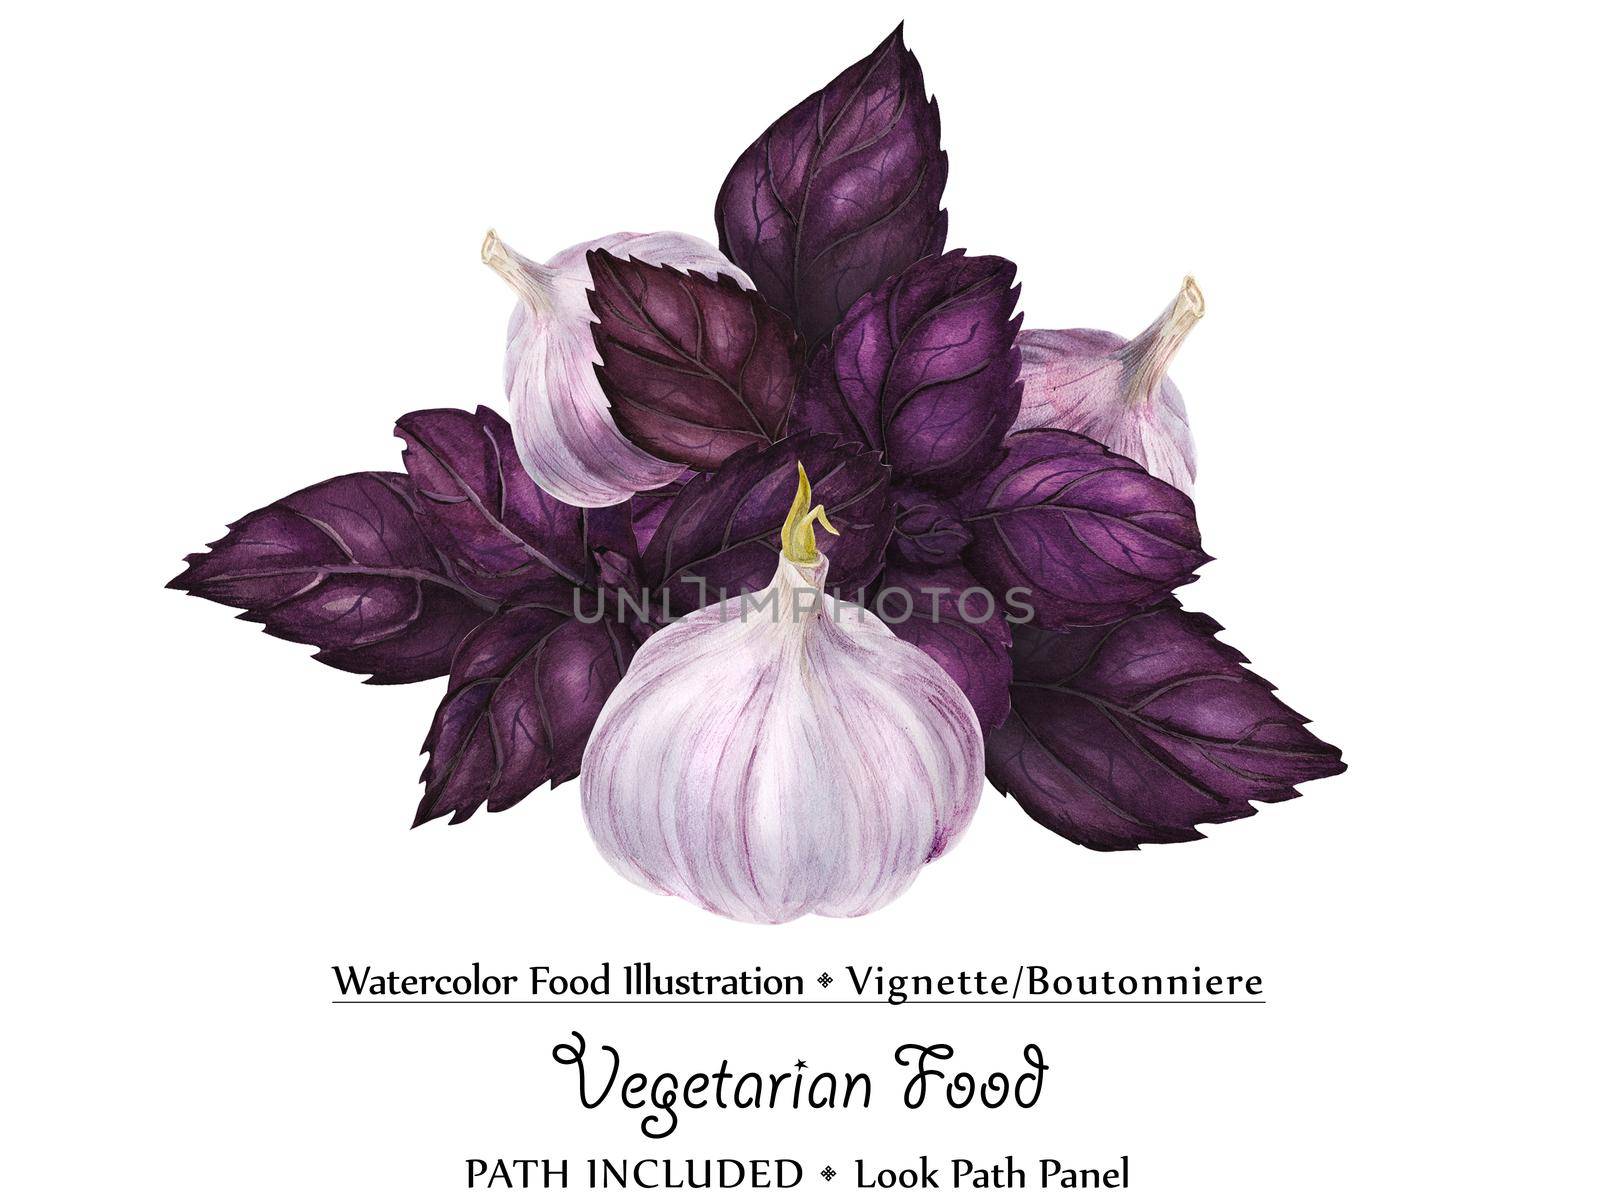 Watercolor vegan vignette biutonniere by freshness purple basil and garlic. Isolated, clipping path included, vegan design